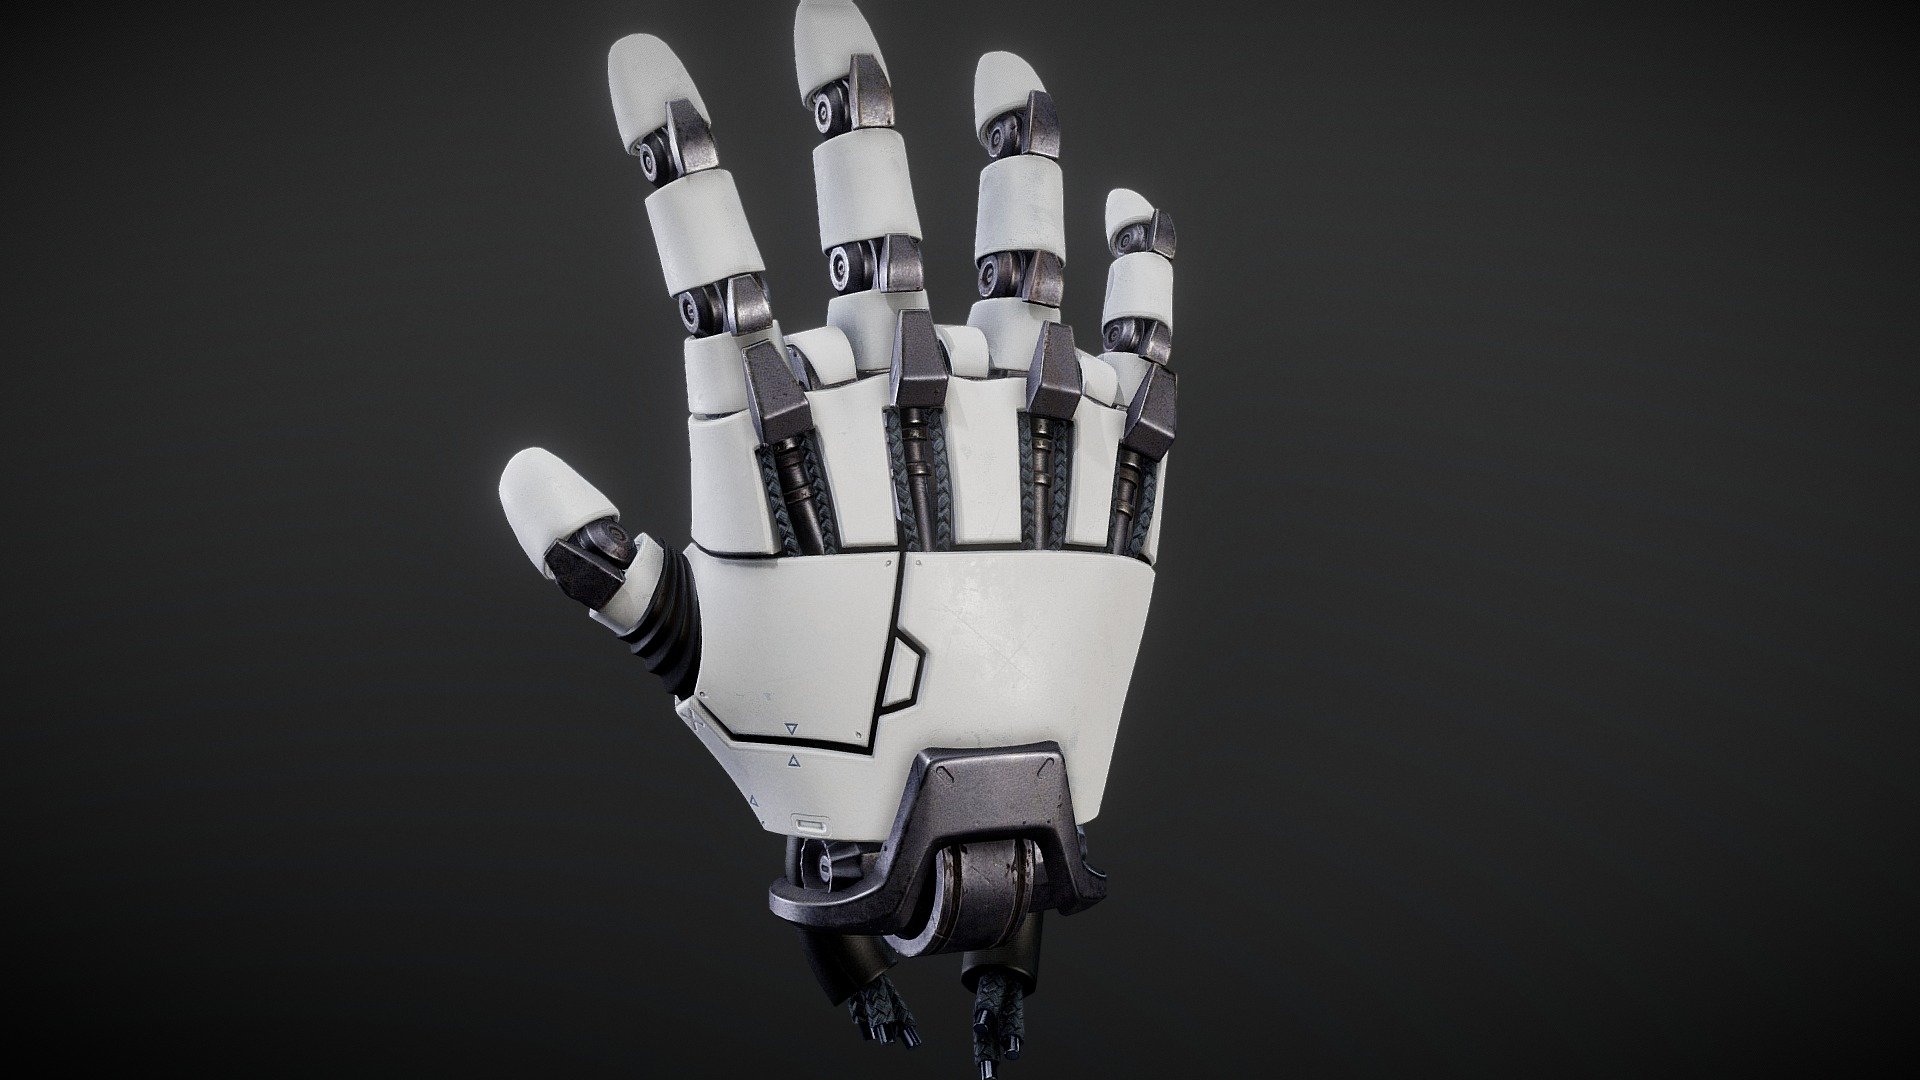 Robotic Sci-fi hand. This project was a learning experience to try new things. I wanted to push myself with hard surface and organic surface modeling as well as build up realistic complex textures in Substance Painter.
Model is fully rigged and game ready sitting around 18,000 Polys with 2048x2048 textures 3d model